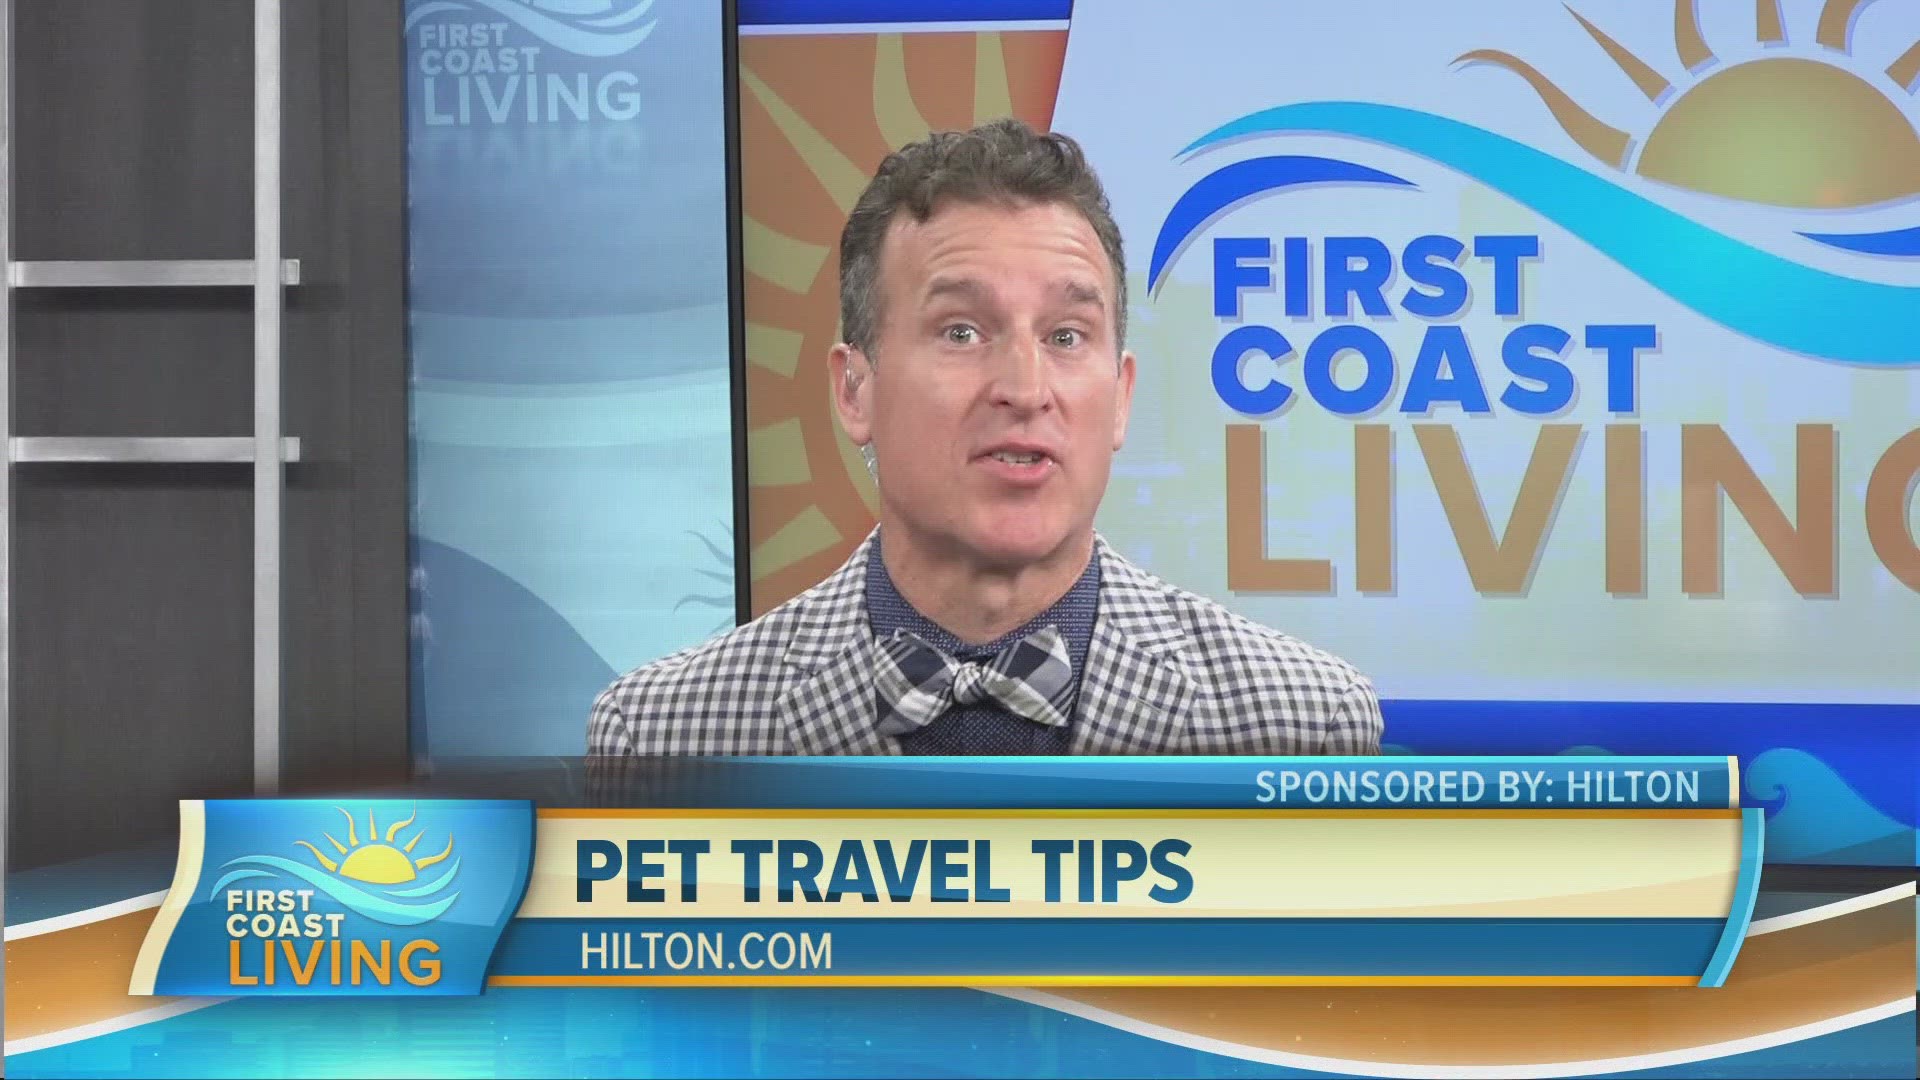 When it comes to living a “ruff and fluff” life – Puppy Bowl Referee Dan Schachner joins us to help plan fun trips for our furry family friends.